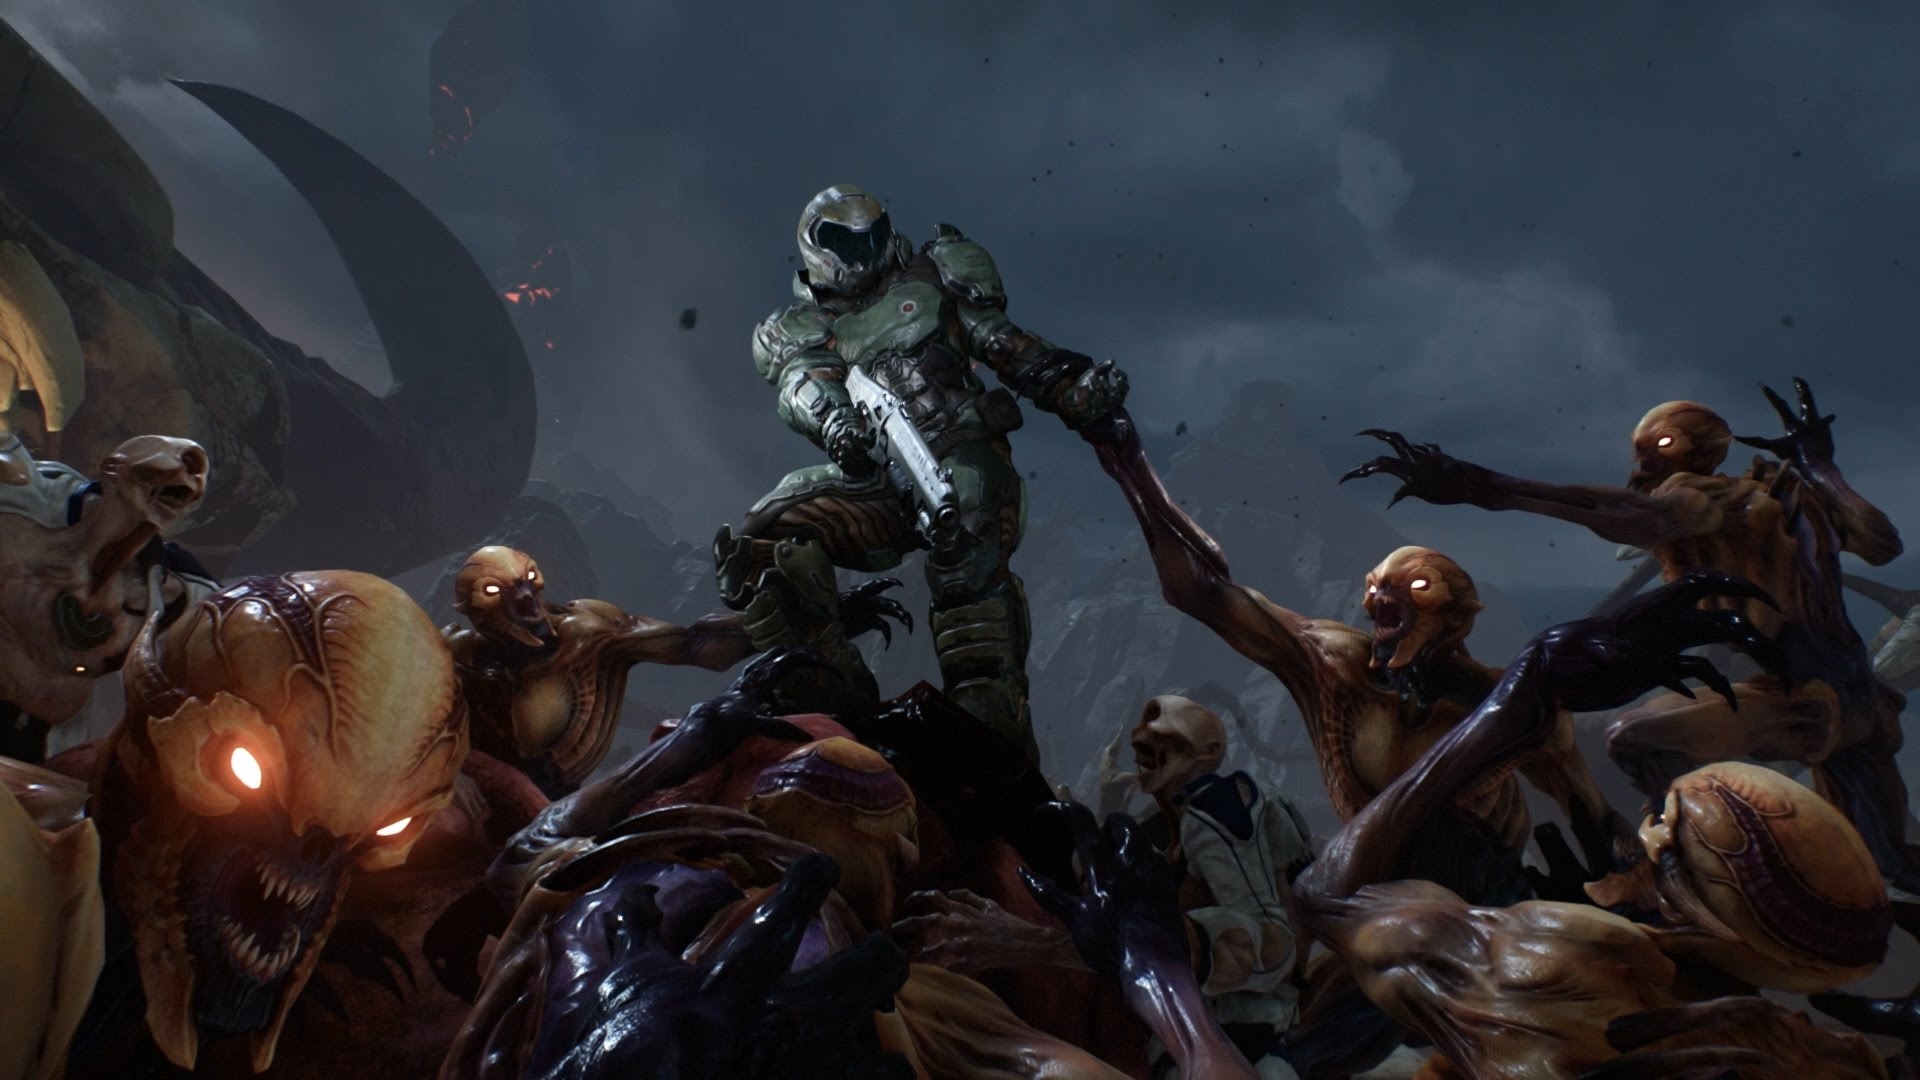 Doom, rebooted for a new decade, is relentless, unsubtle space-age violence